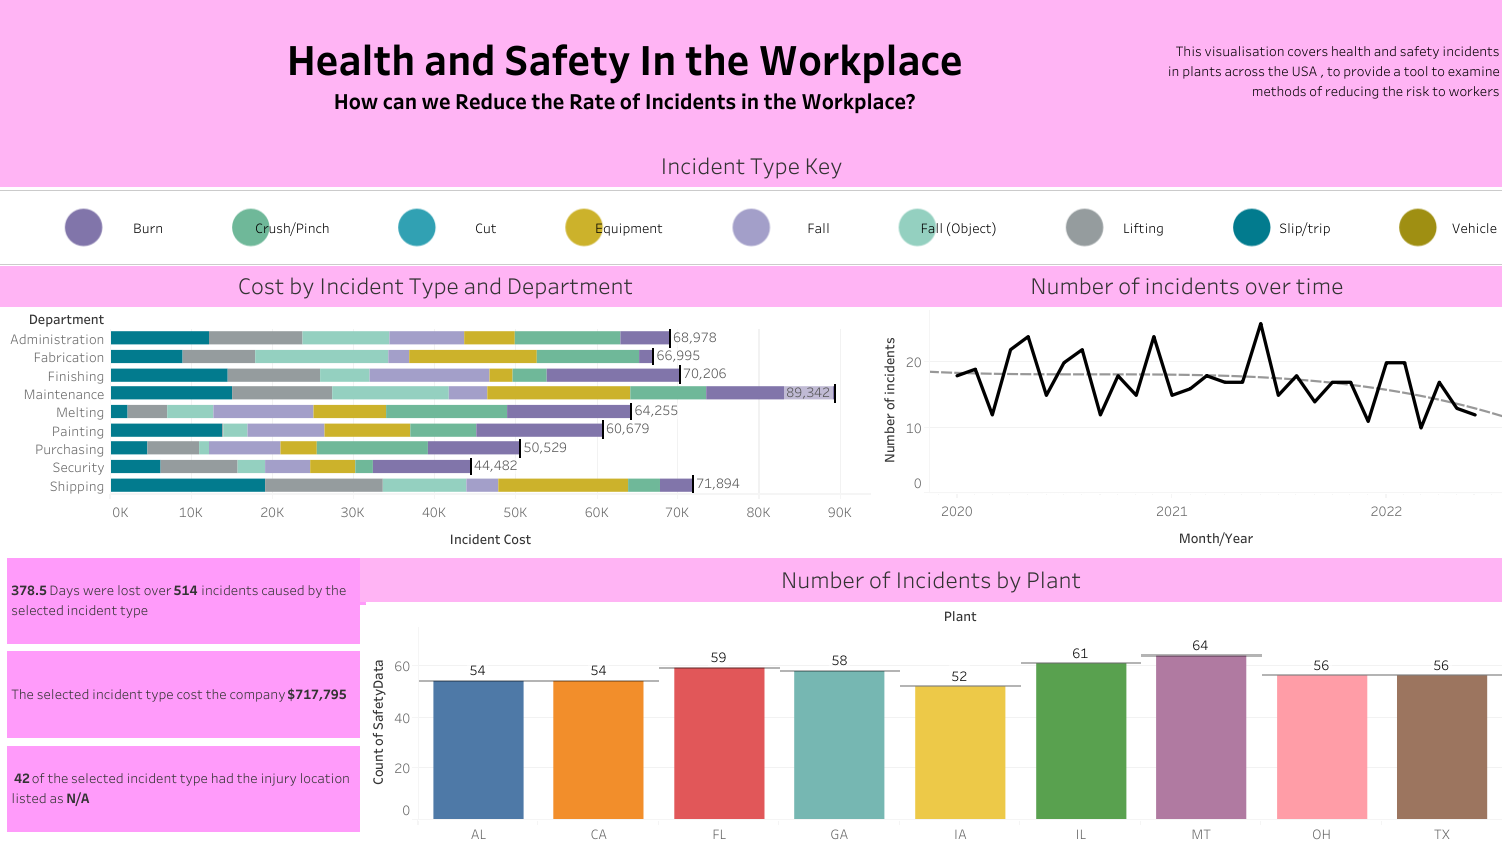 HR KPIs: Driver of Absenteeism Rate - Workplace Safety